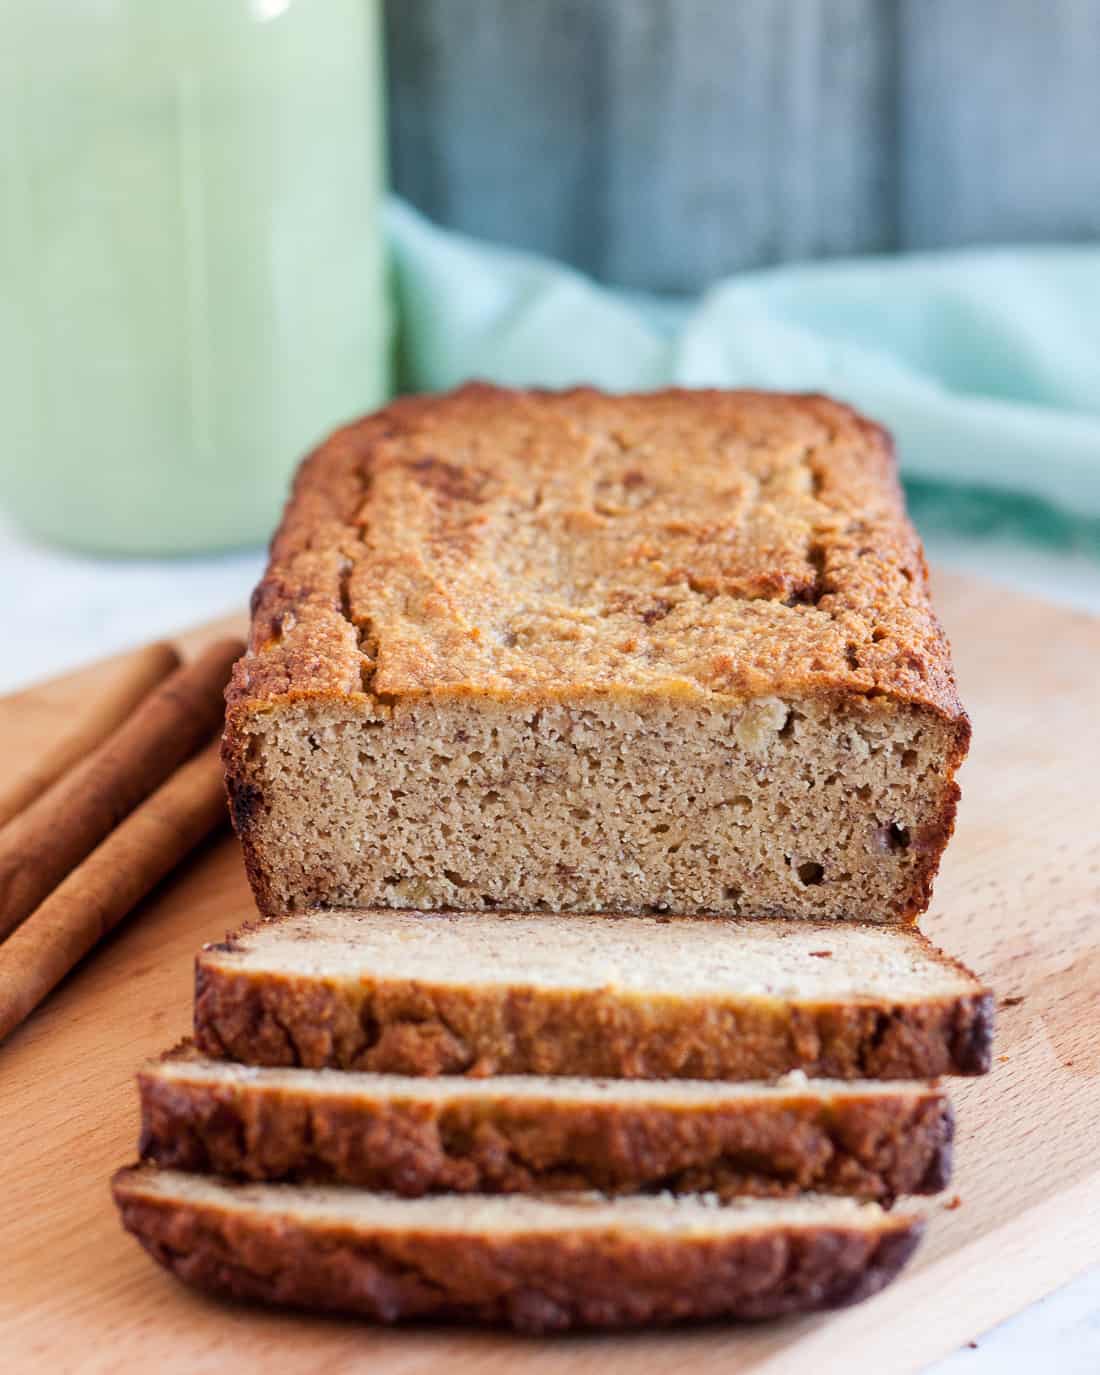 Gluten free and refined sugar free, this paleo banana bread still feels indulgent. With a great texture, it's a tasty breakfast treat or snack. * Recipe on GoodieGodmother.com